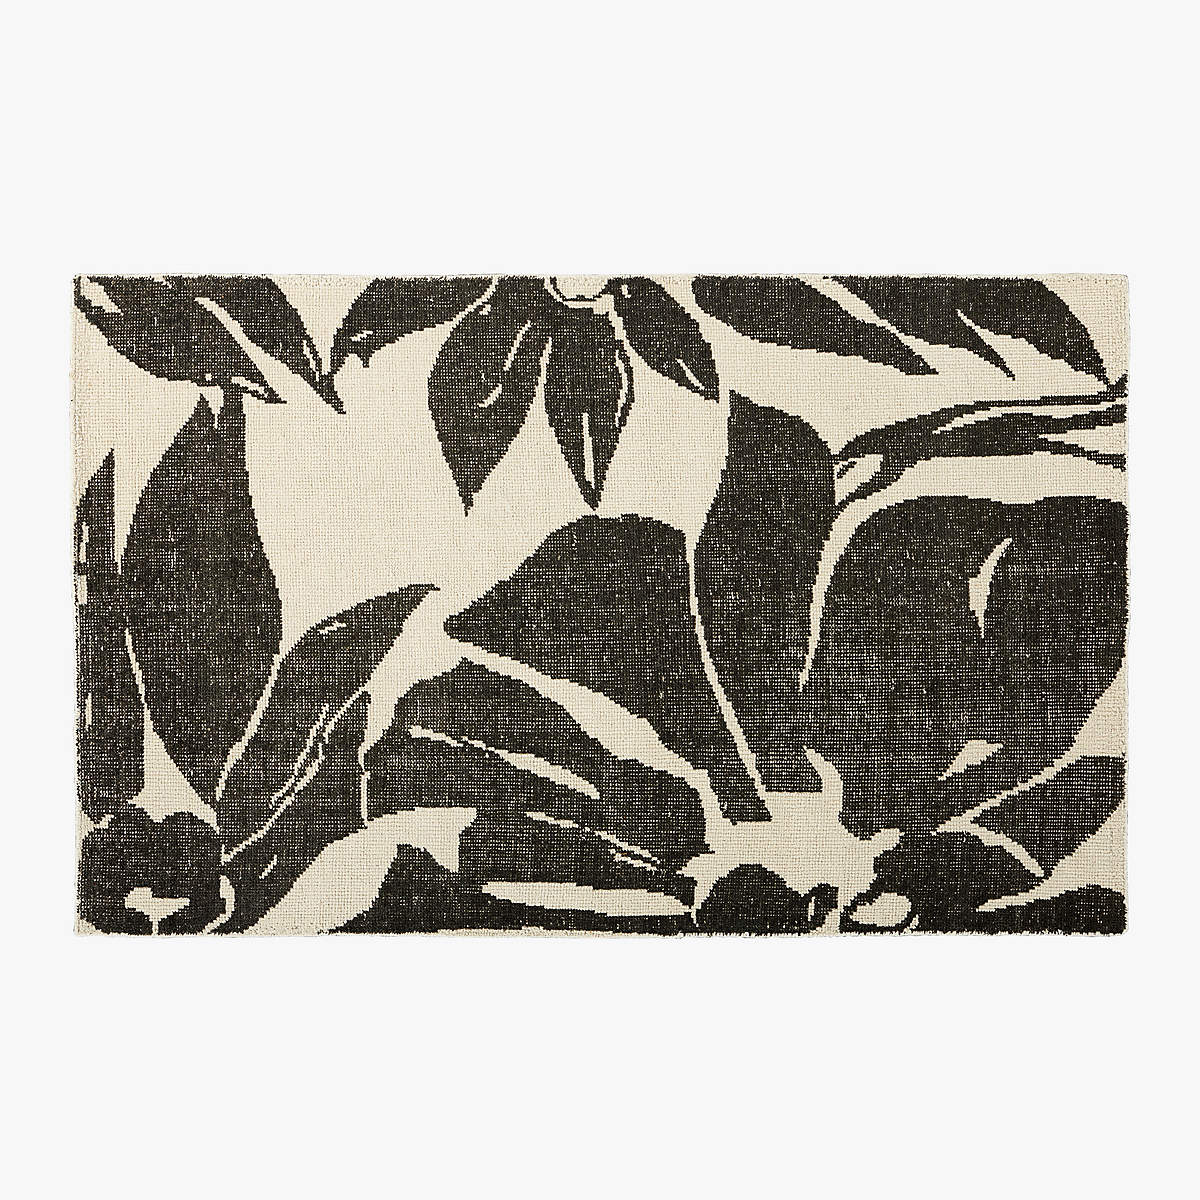 Loren Handknotted Black and White Floral Rug 5'x8' + Reviews | CB2